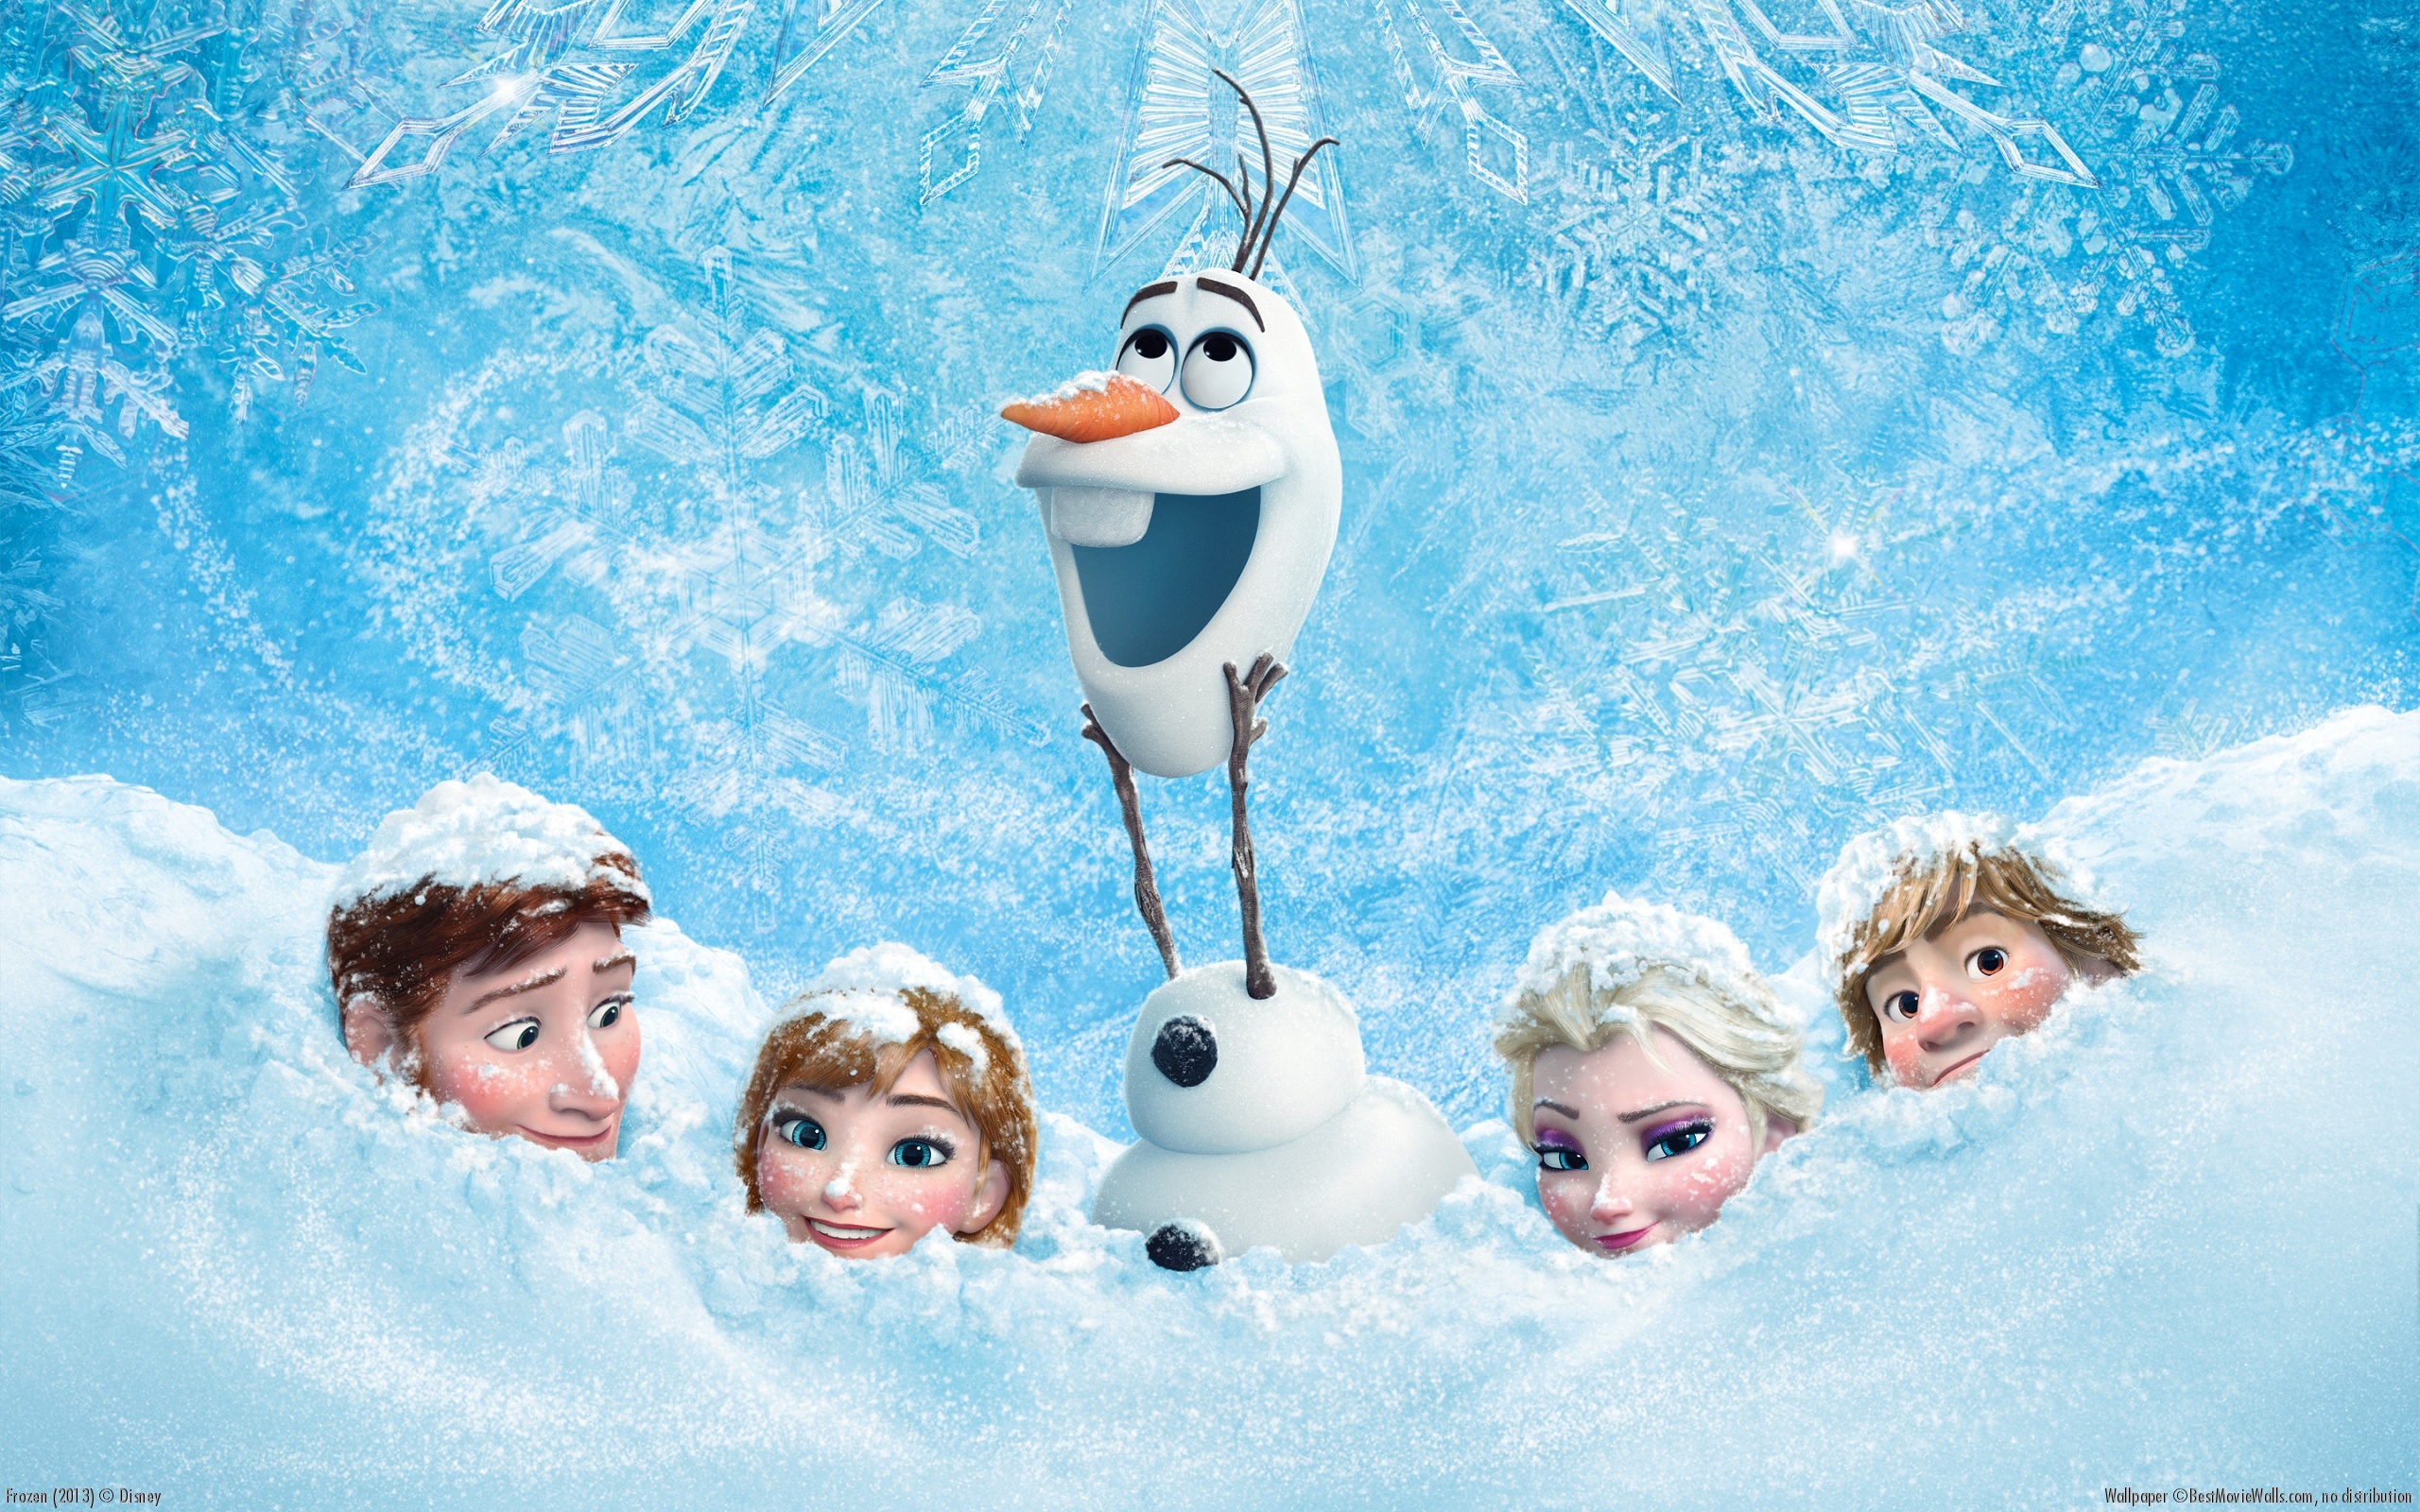 Disney Announces Frozen 4 is Officially in The Works